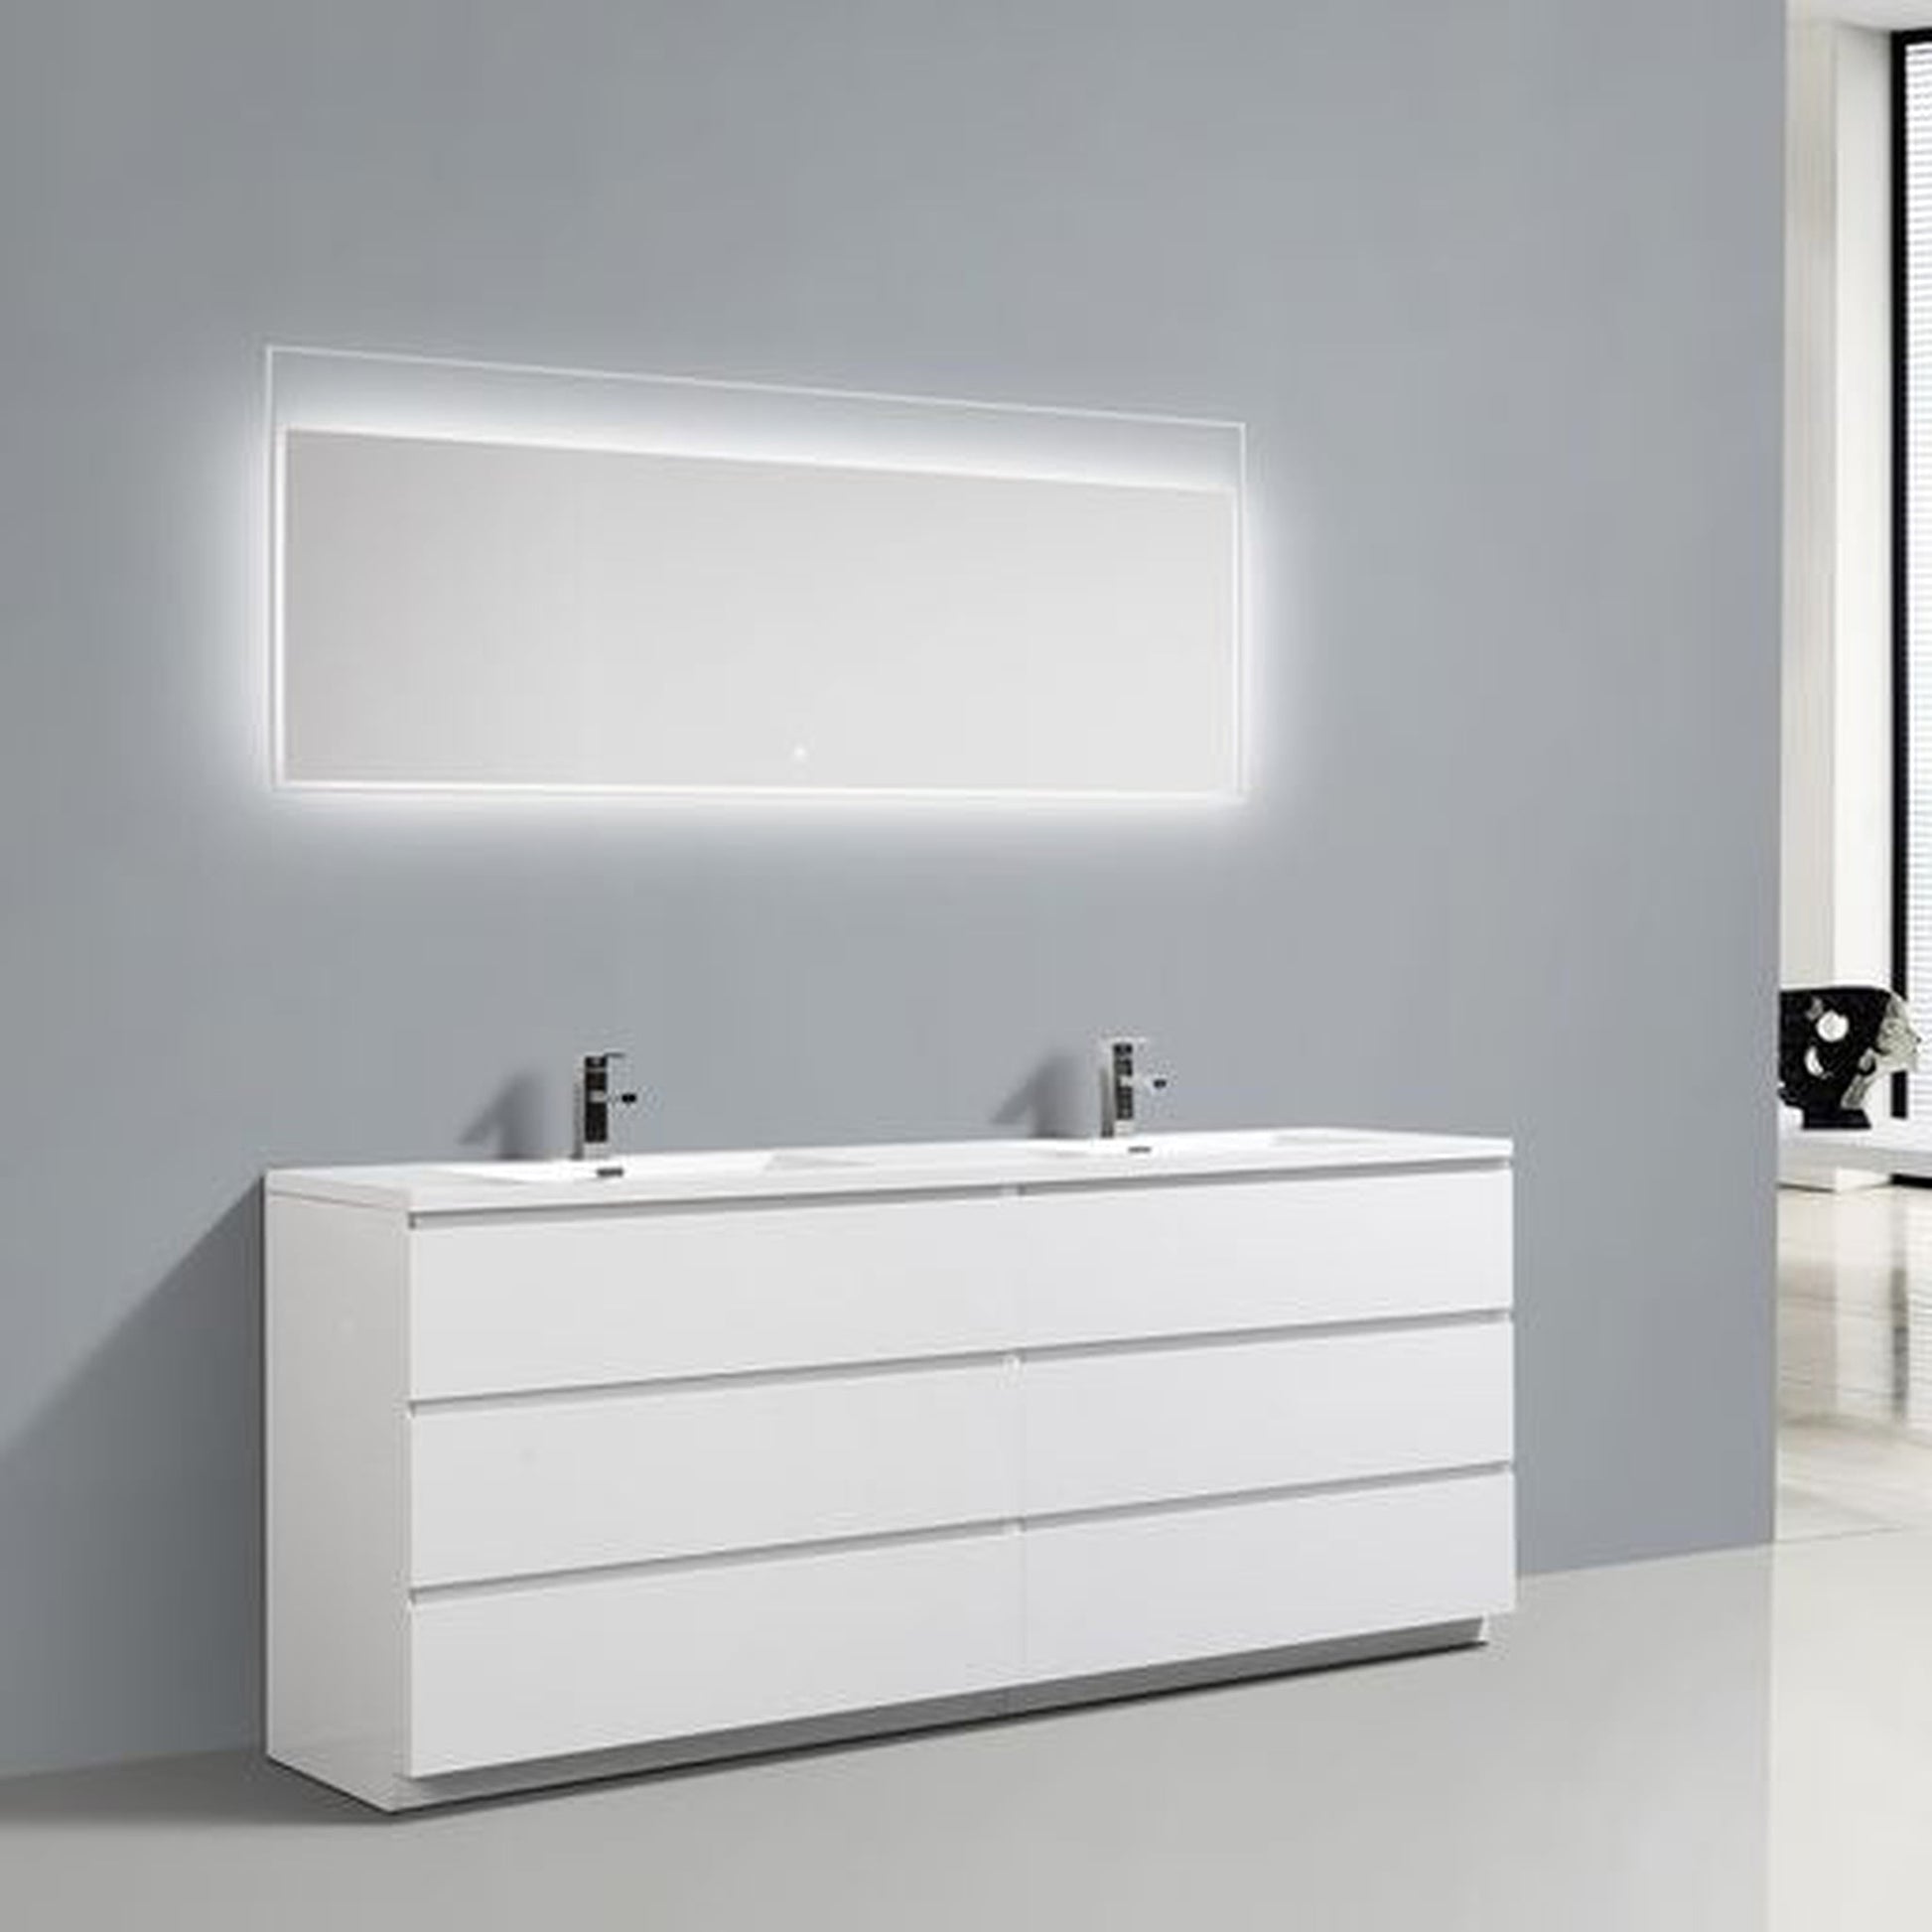 Moreno Bath Angeles 84" High Gloss White Freestanding Vanity With Double Reinforced White Acrylic Sinks